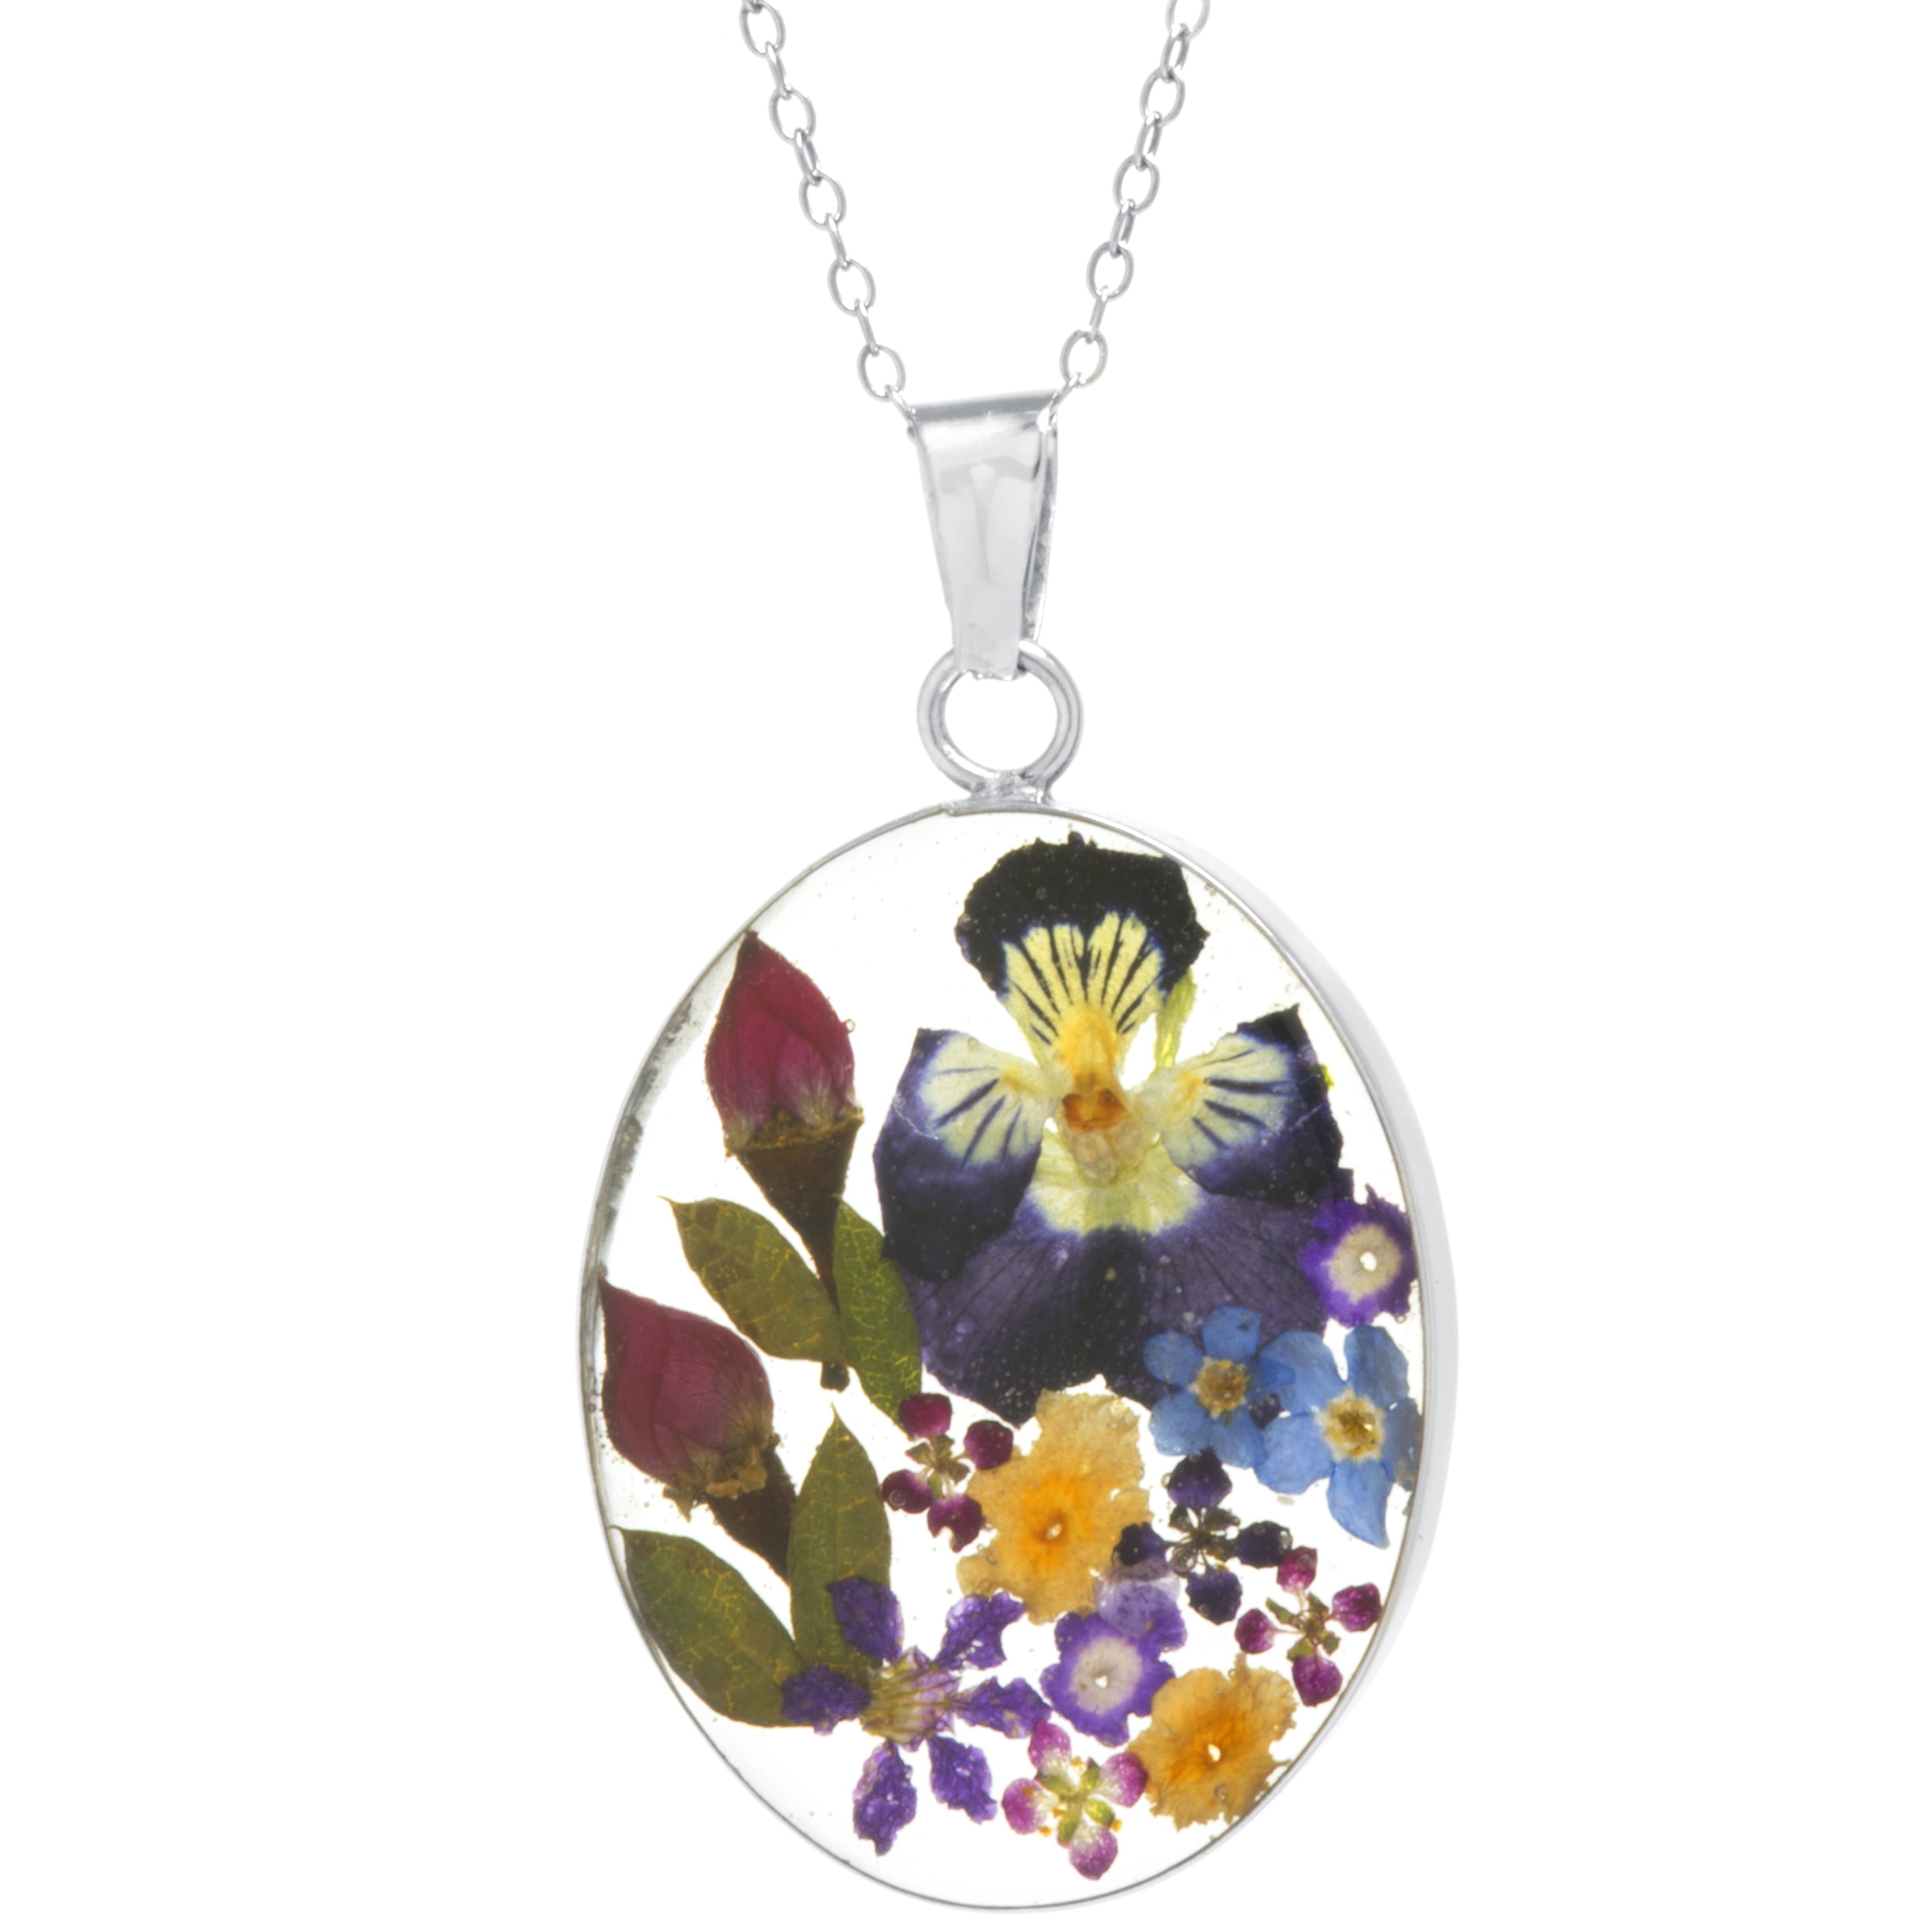 Guitar Shaped Silver Tone Pendant with Real Dried Flowers